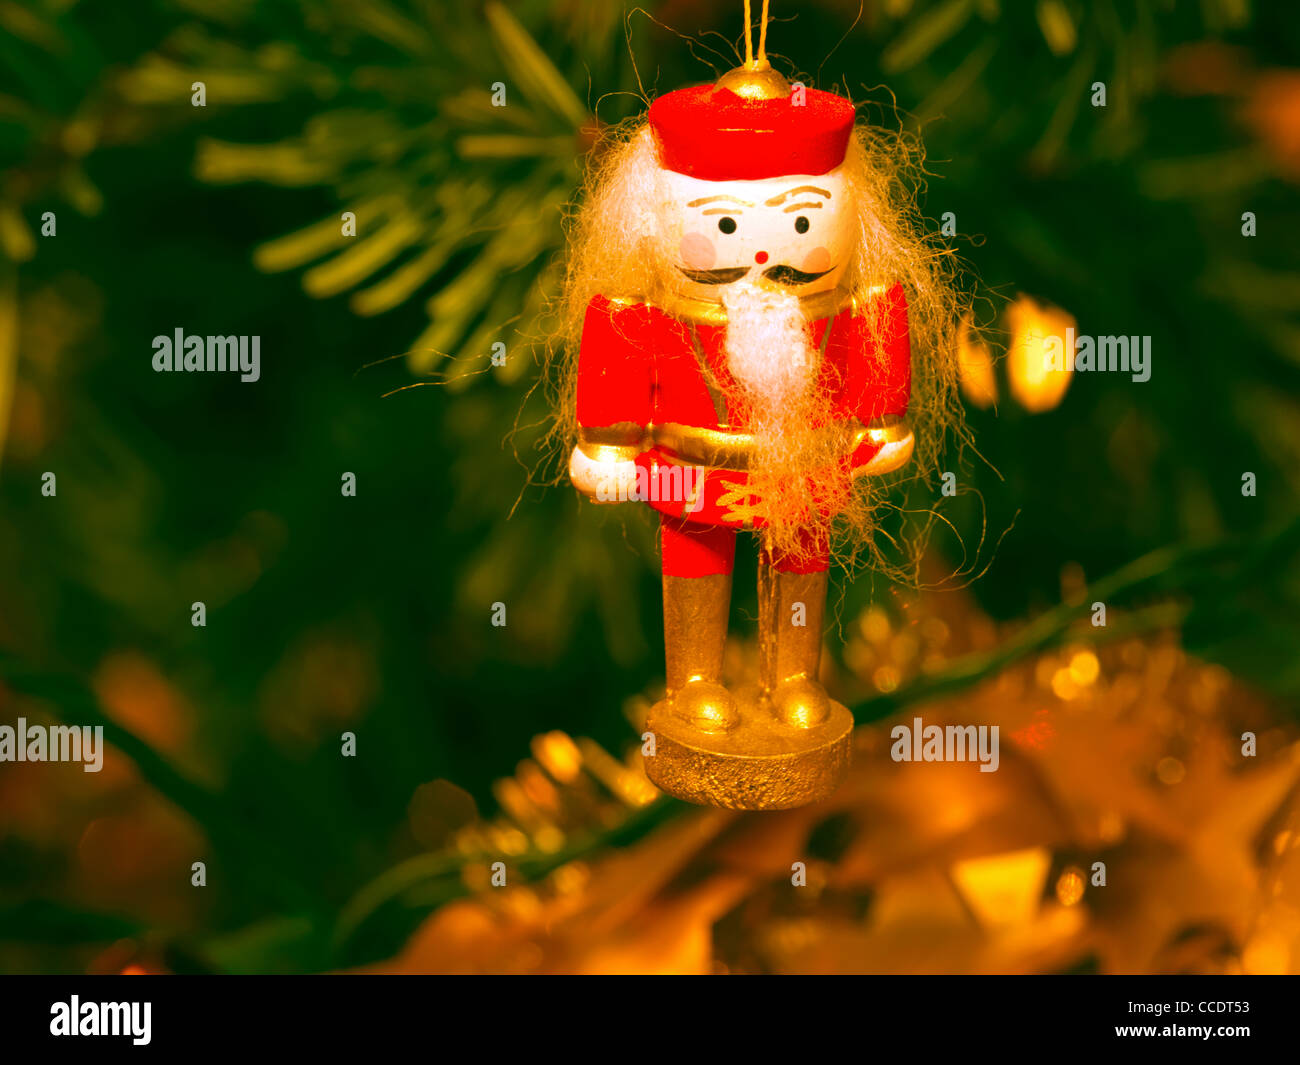 Toy Soldier Christmas Decoration Hanging On Christmas Tree Stock Photo